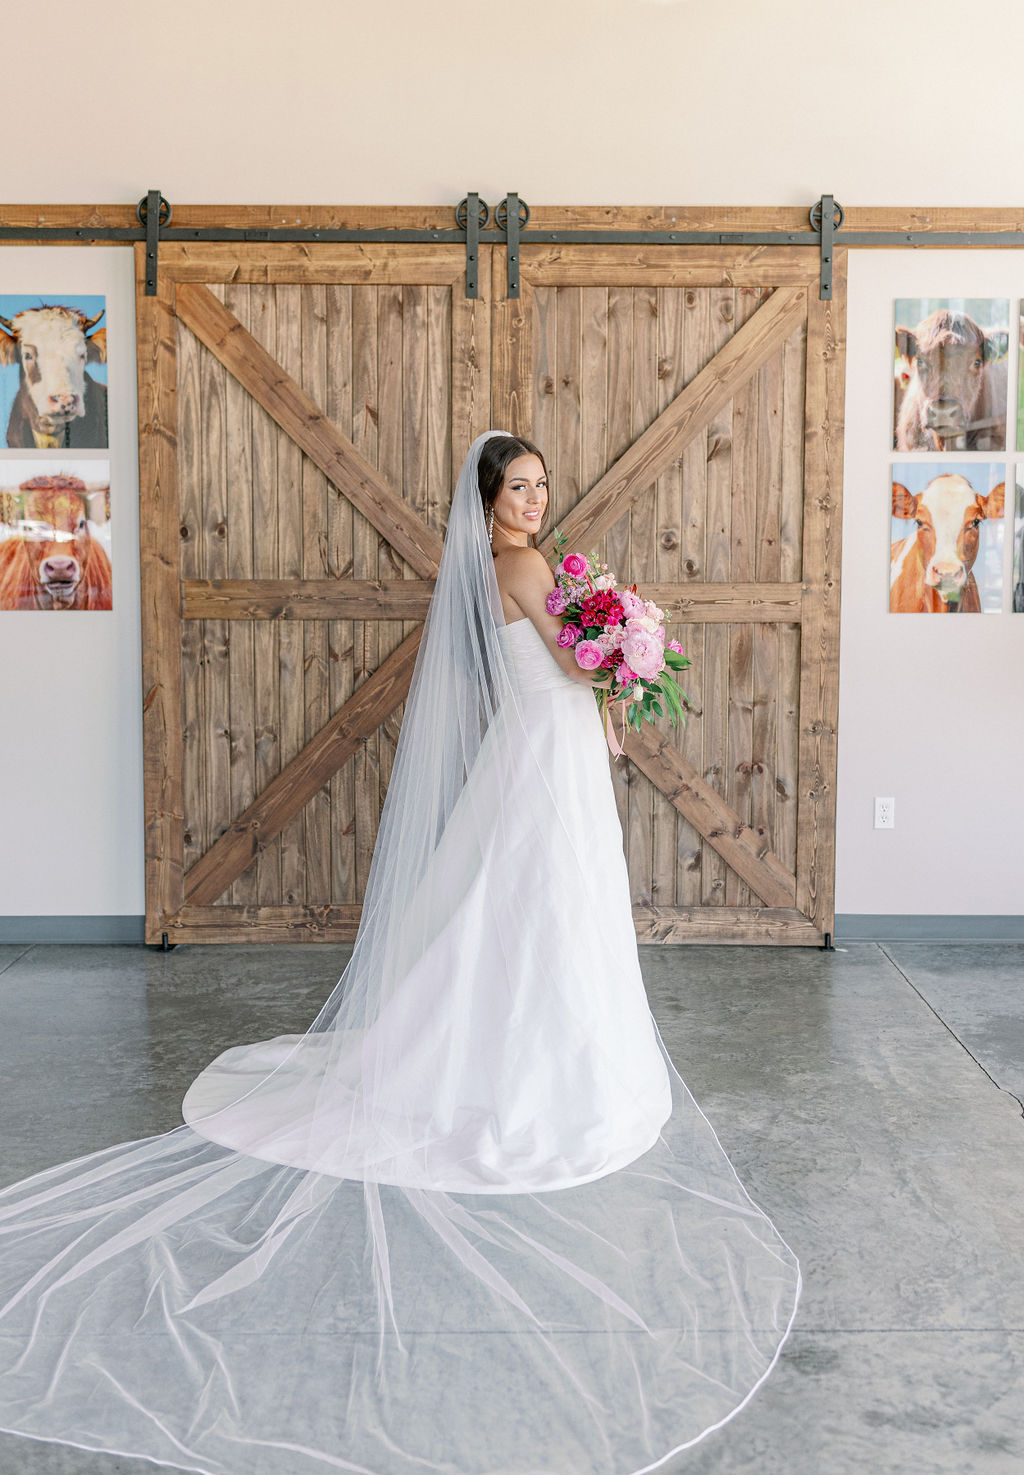 he Perfect Blend: A Modern Brewery Editorial with Fine Art Details | Elizabeth Anne Designs